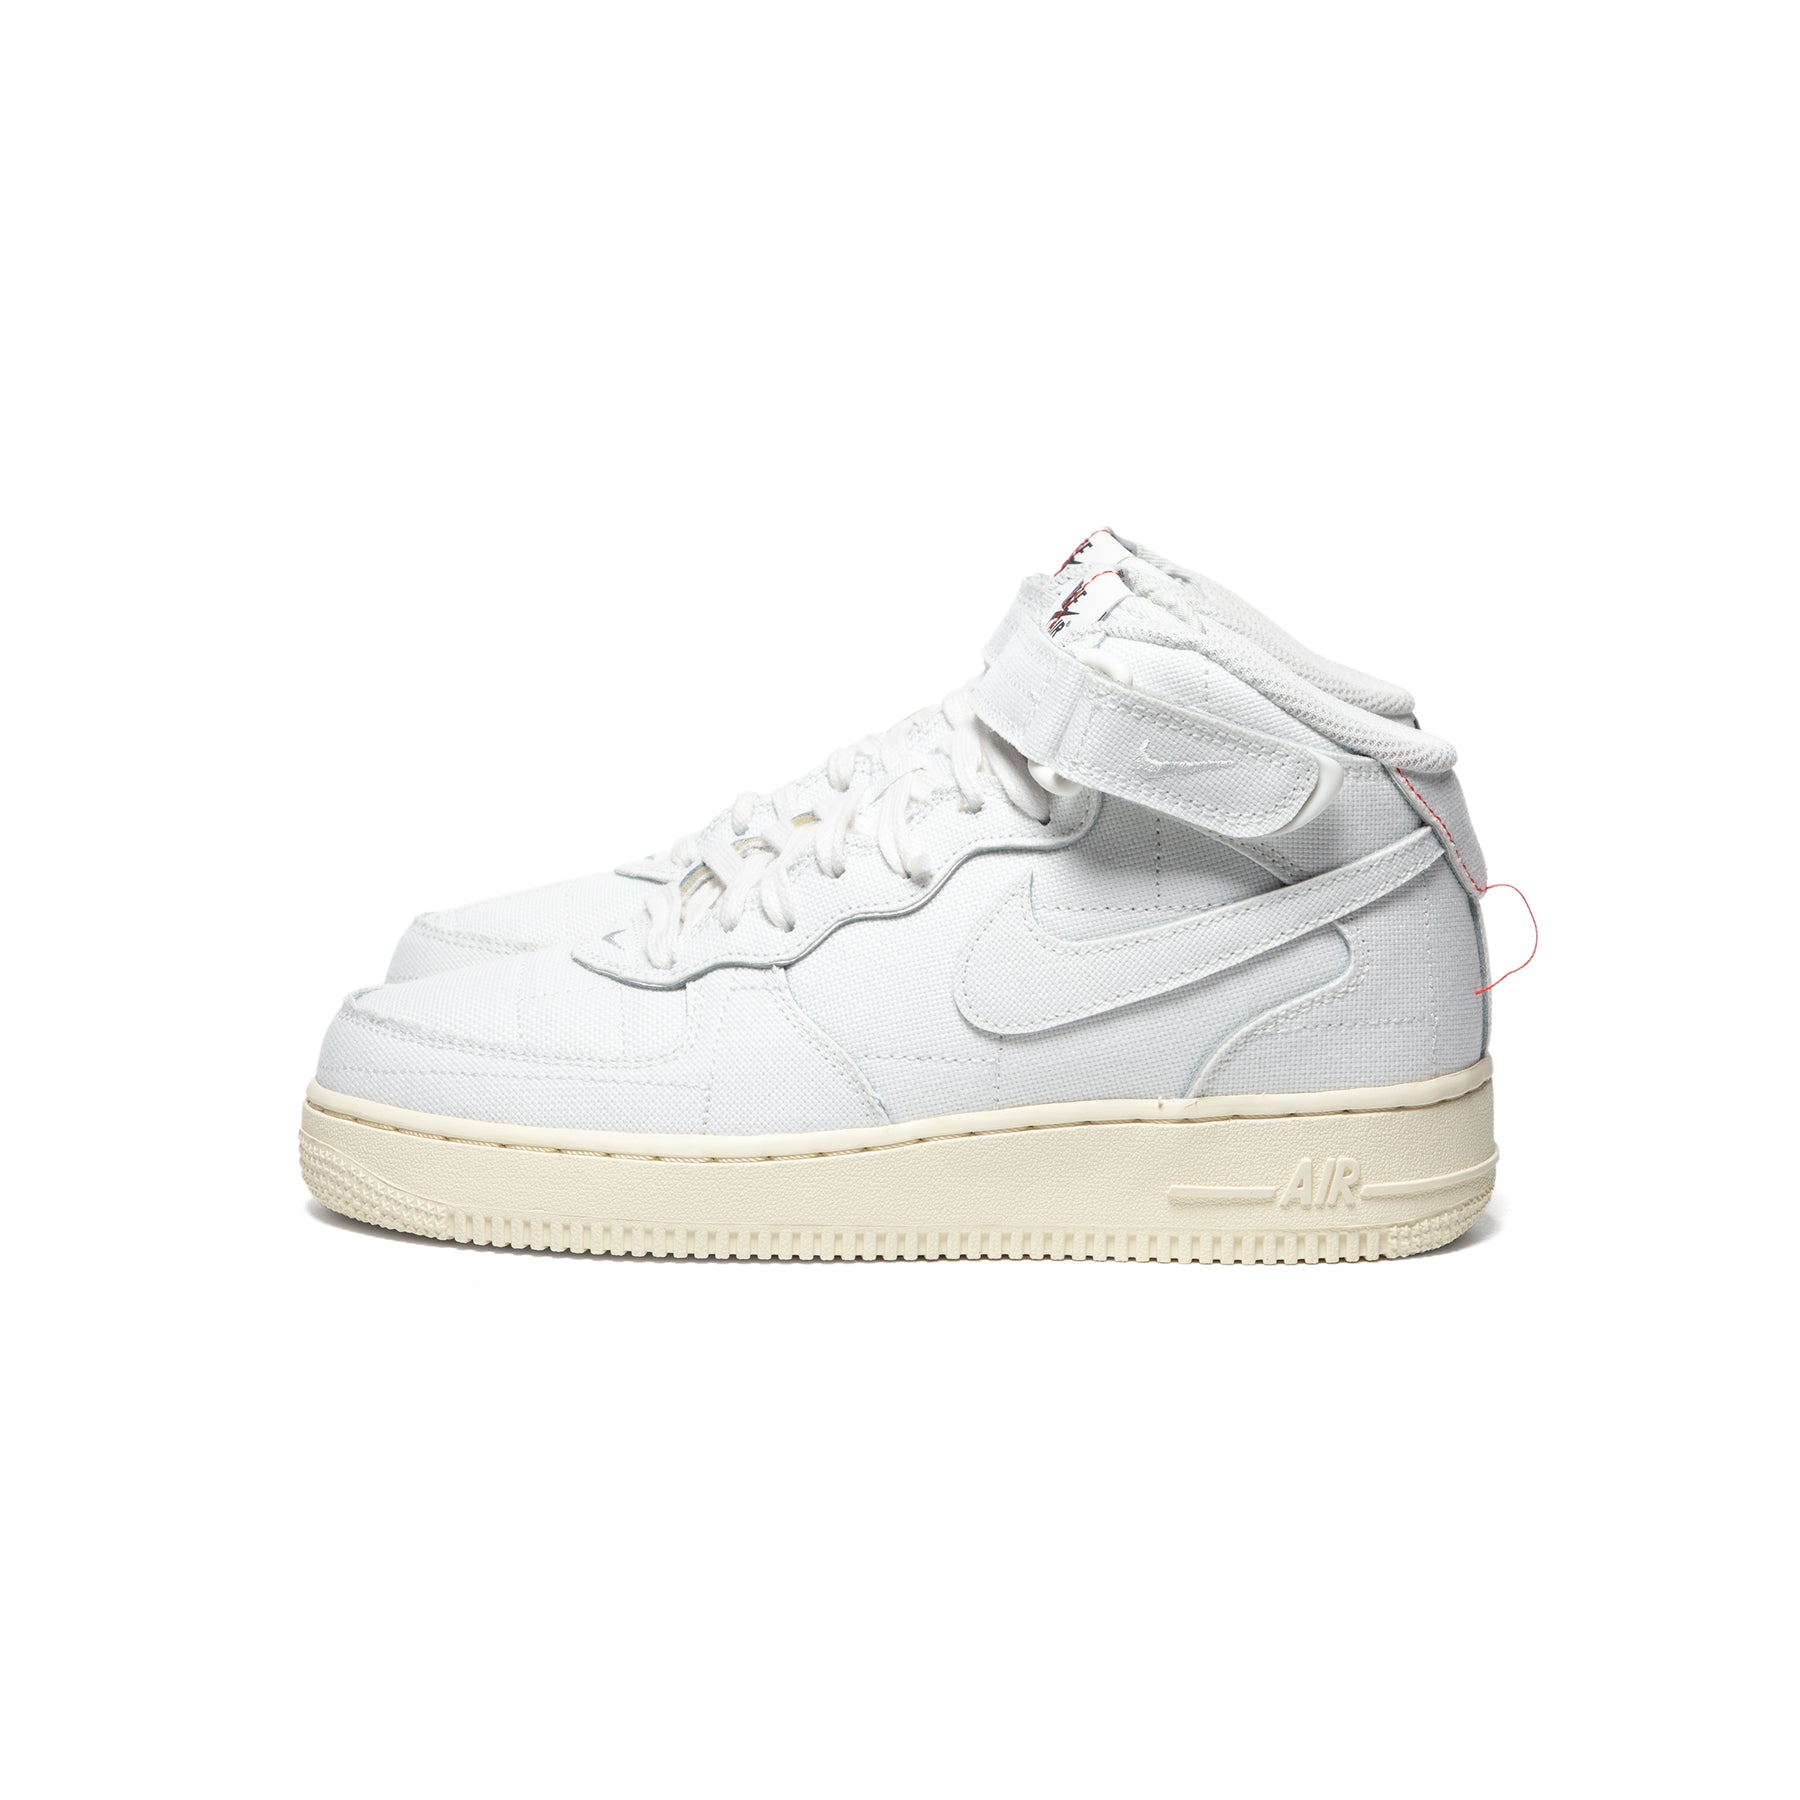 Nike Air Force 1 Mid '07 LX - Shimmer / Black / Pale Ivory / Coconut – Kith